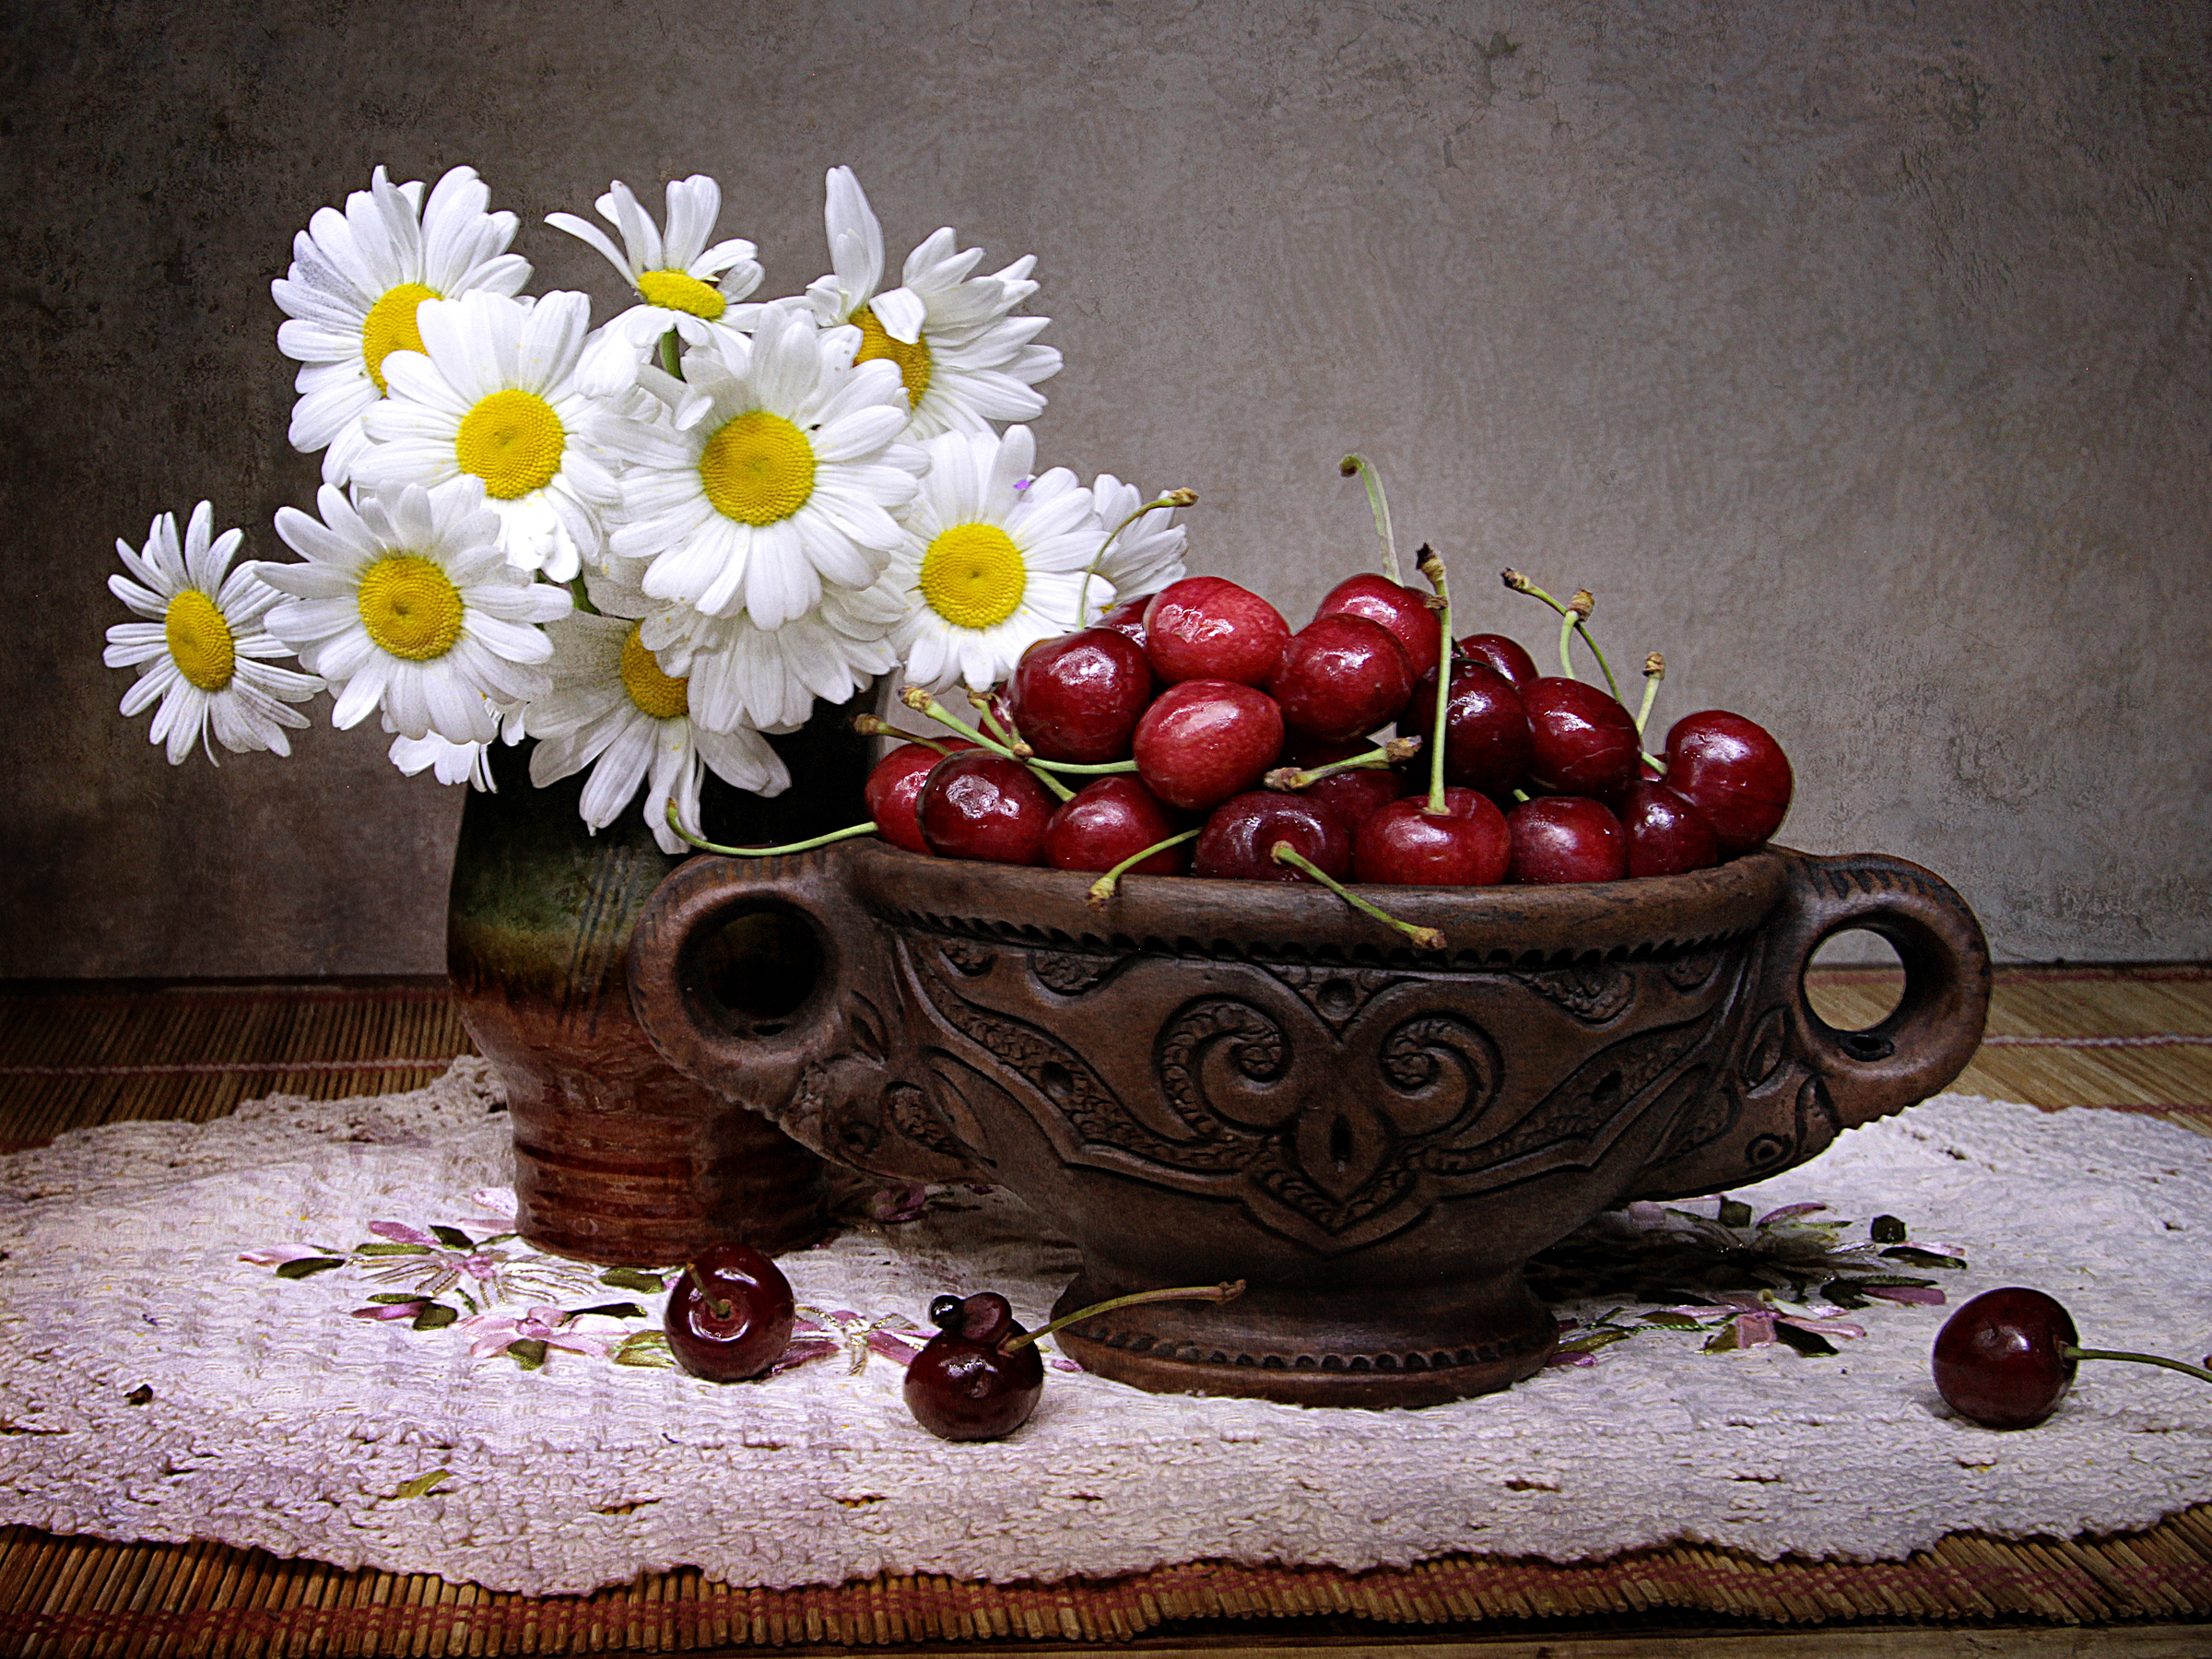 photography, still life, bowl, camomile, cherry